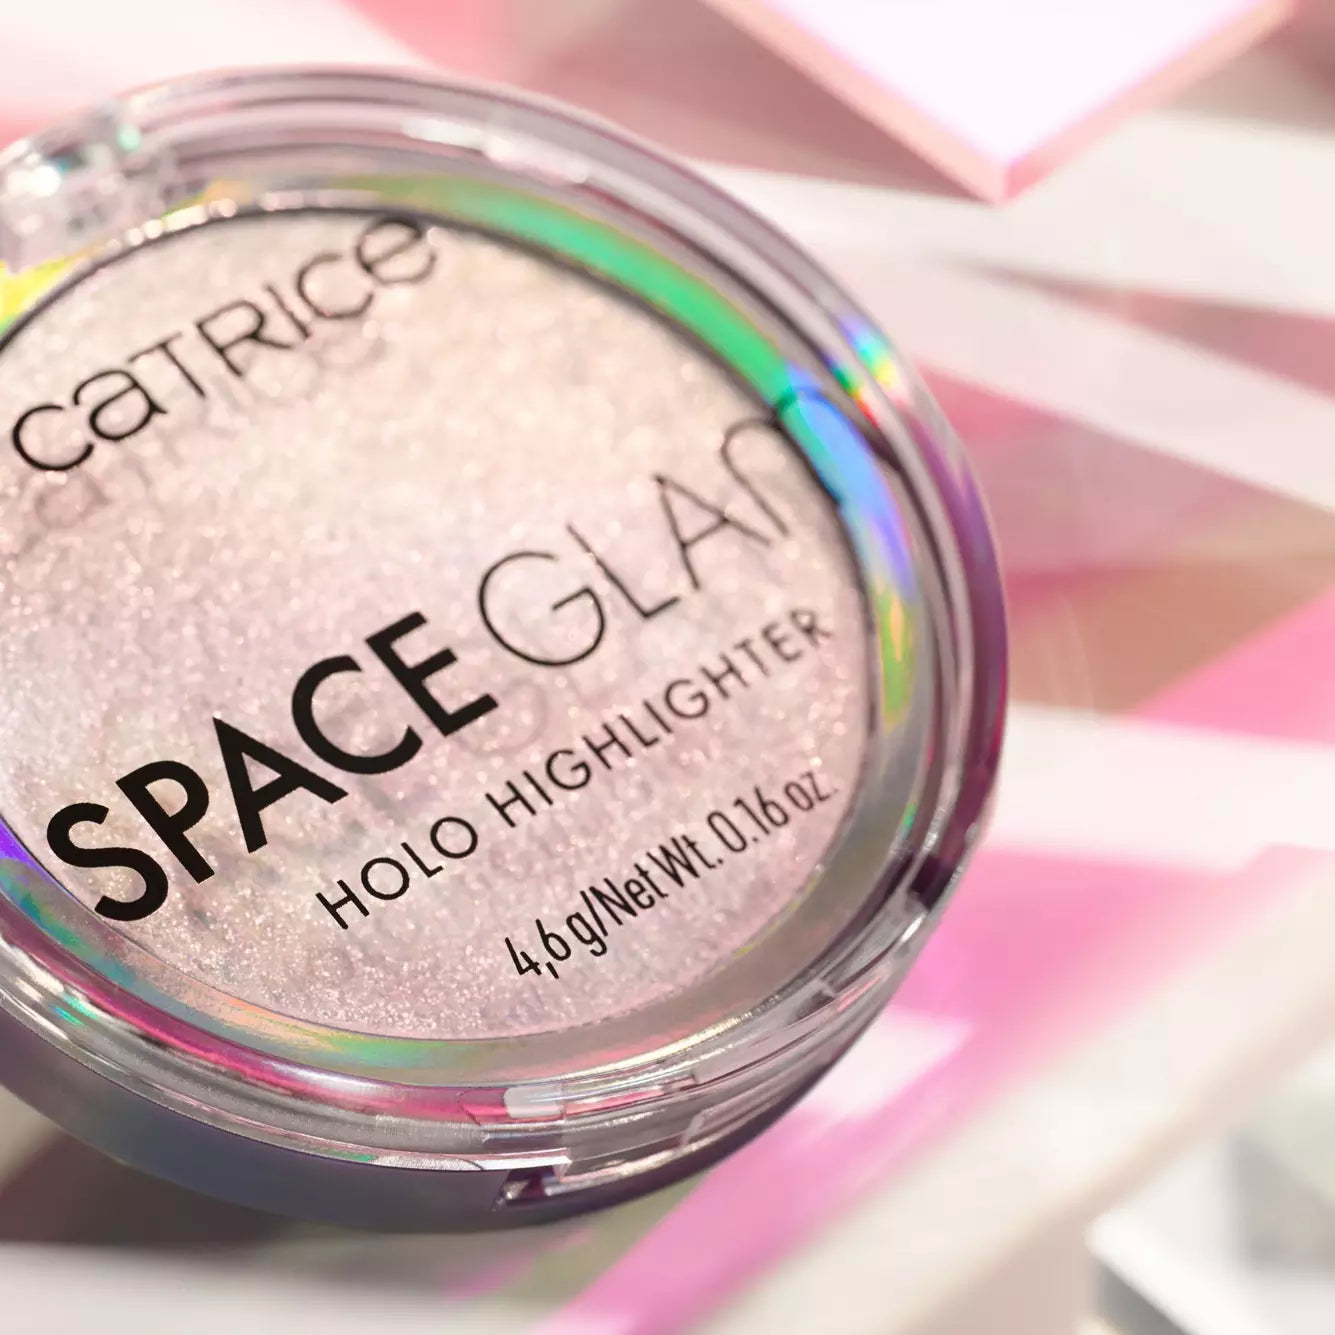 Catrice Space Glam Holo Highlighter - 010 Beam Me Up